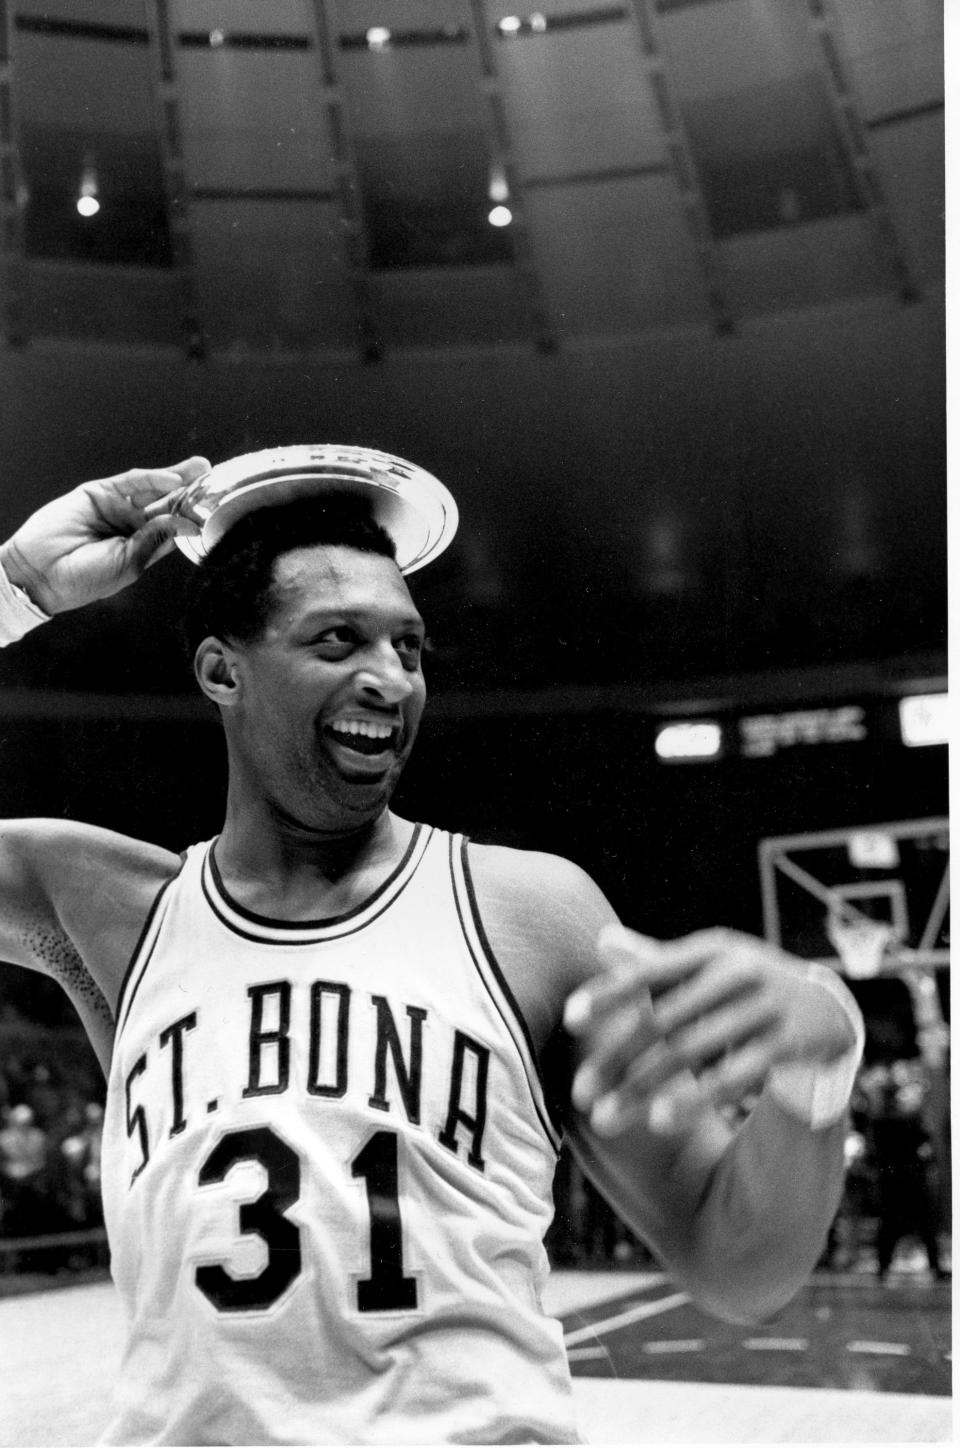 Bob Lanier of St. Bonaventure puts his MVP trophy on his head after his team won the ECAC Holiday Festival basketball tournament at New York's Madison Square Garden on Dec. 31, 1969.  St. Bona defeated Purdue 91-75.